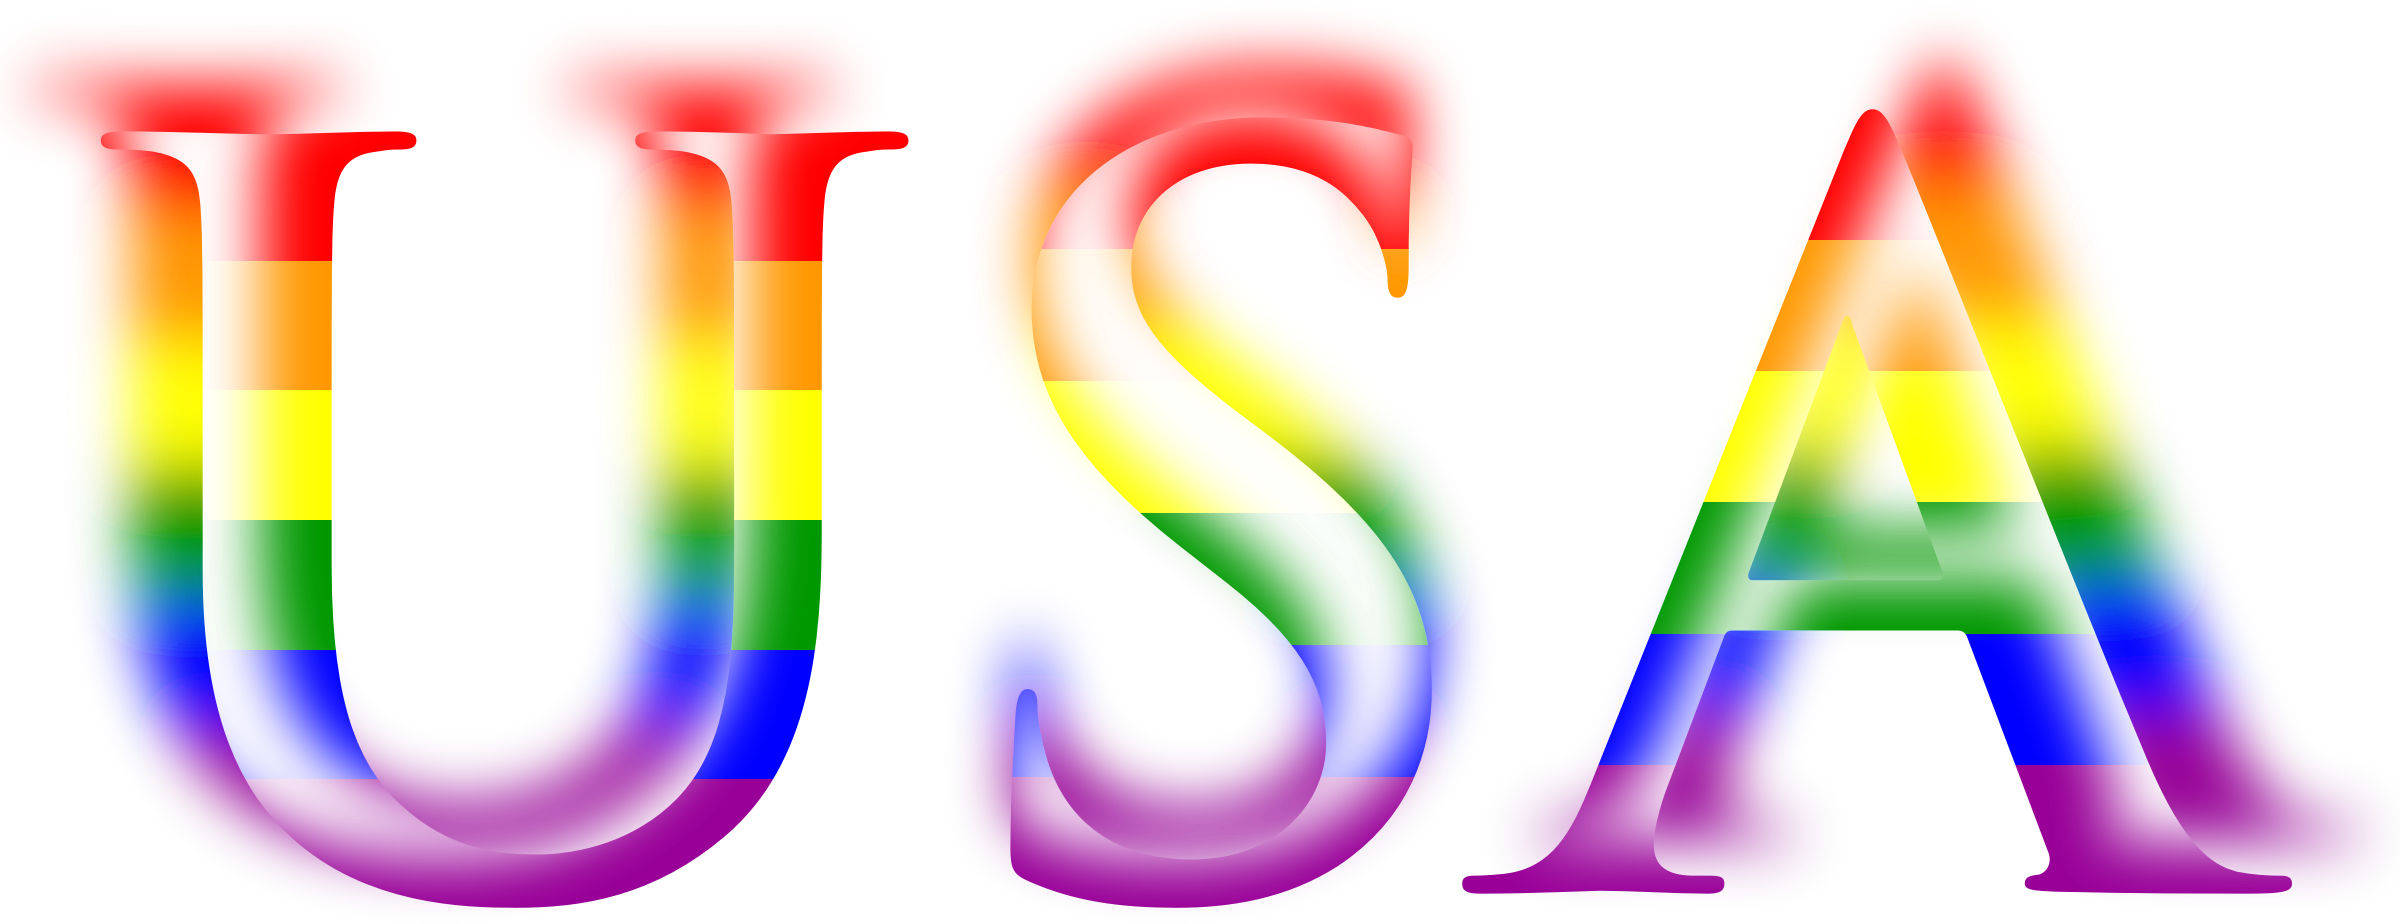 Download USA Rainbow Vector Clipart image - Free stock photo - Public Domain photo - CC0 Images